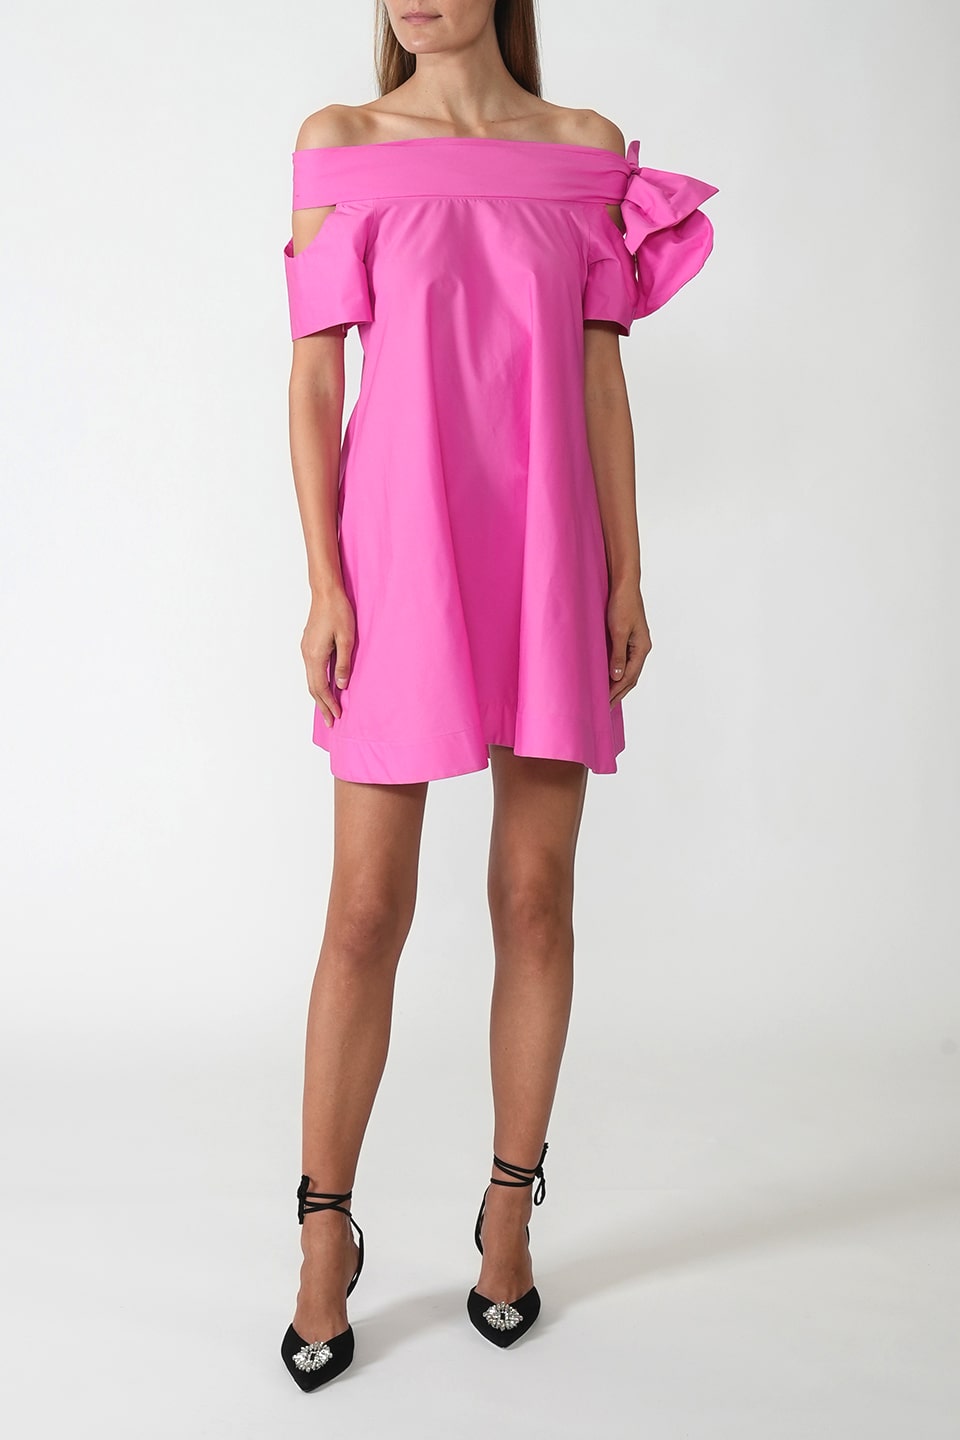 Shop online trendy Pink Mini dresses from Vivetta Fashion designer. Product gallery 1